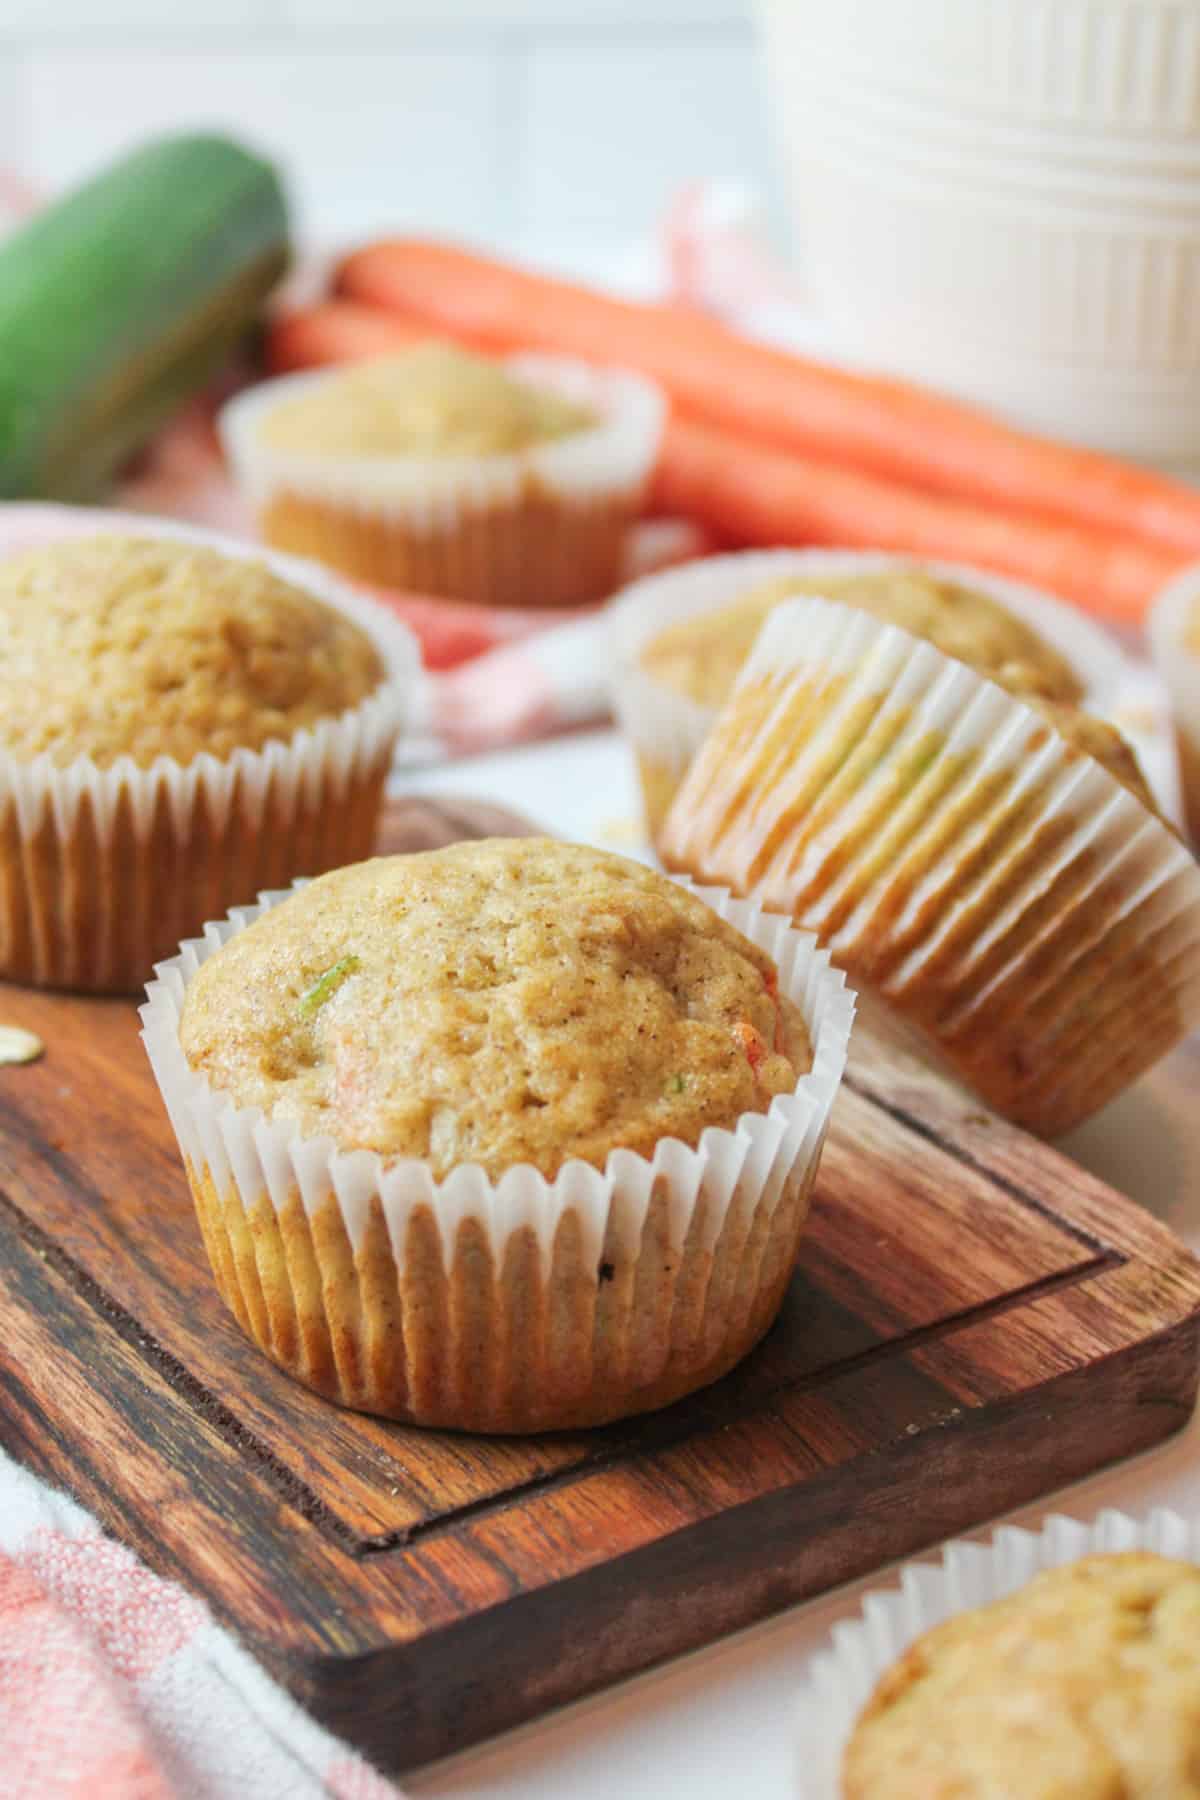 muffins on a wooden board with zucchini and carrot in background